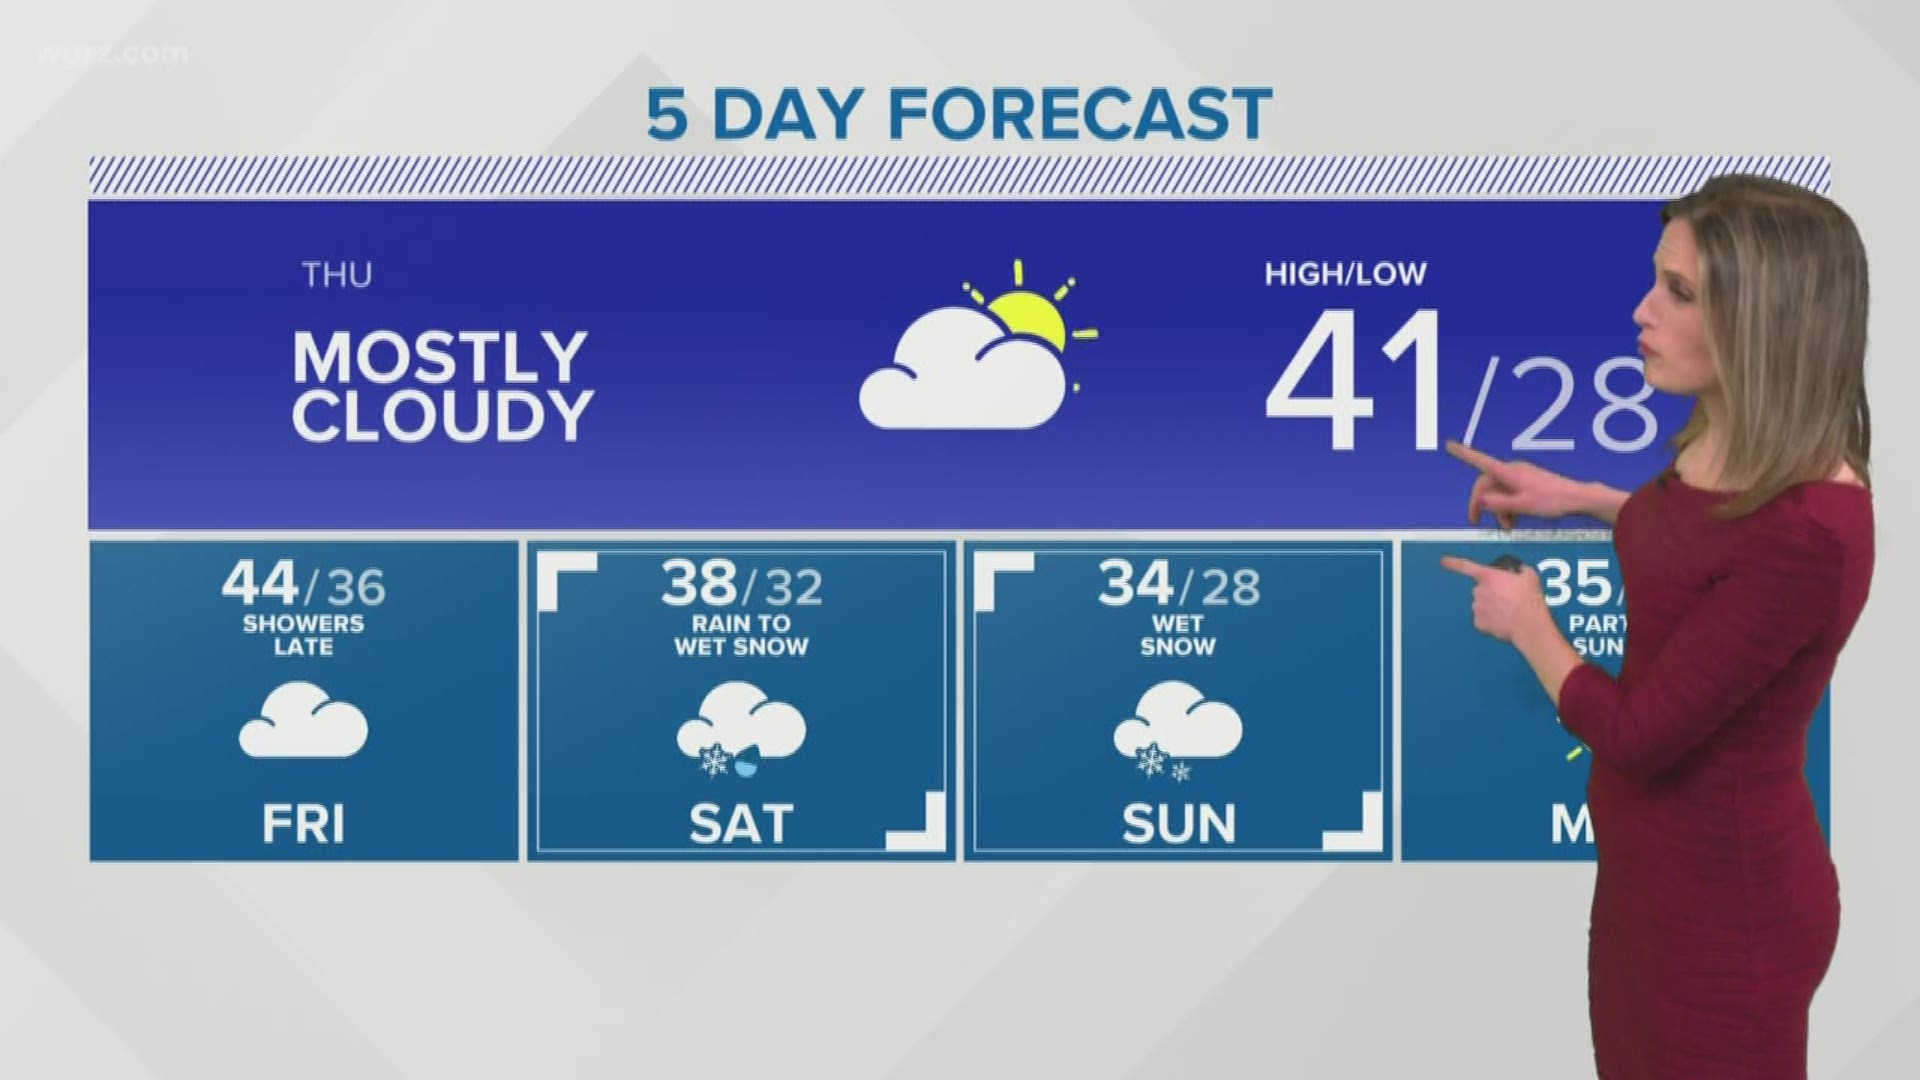 The 5 day forecast shows more mild air, at least for January, coming through the end of the week.